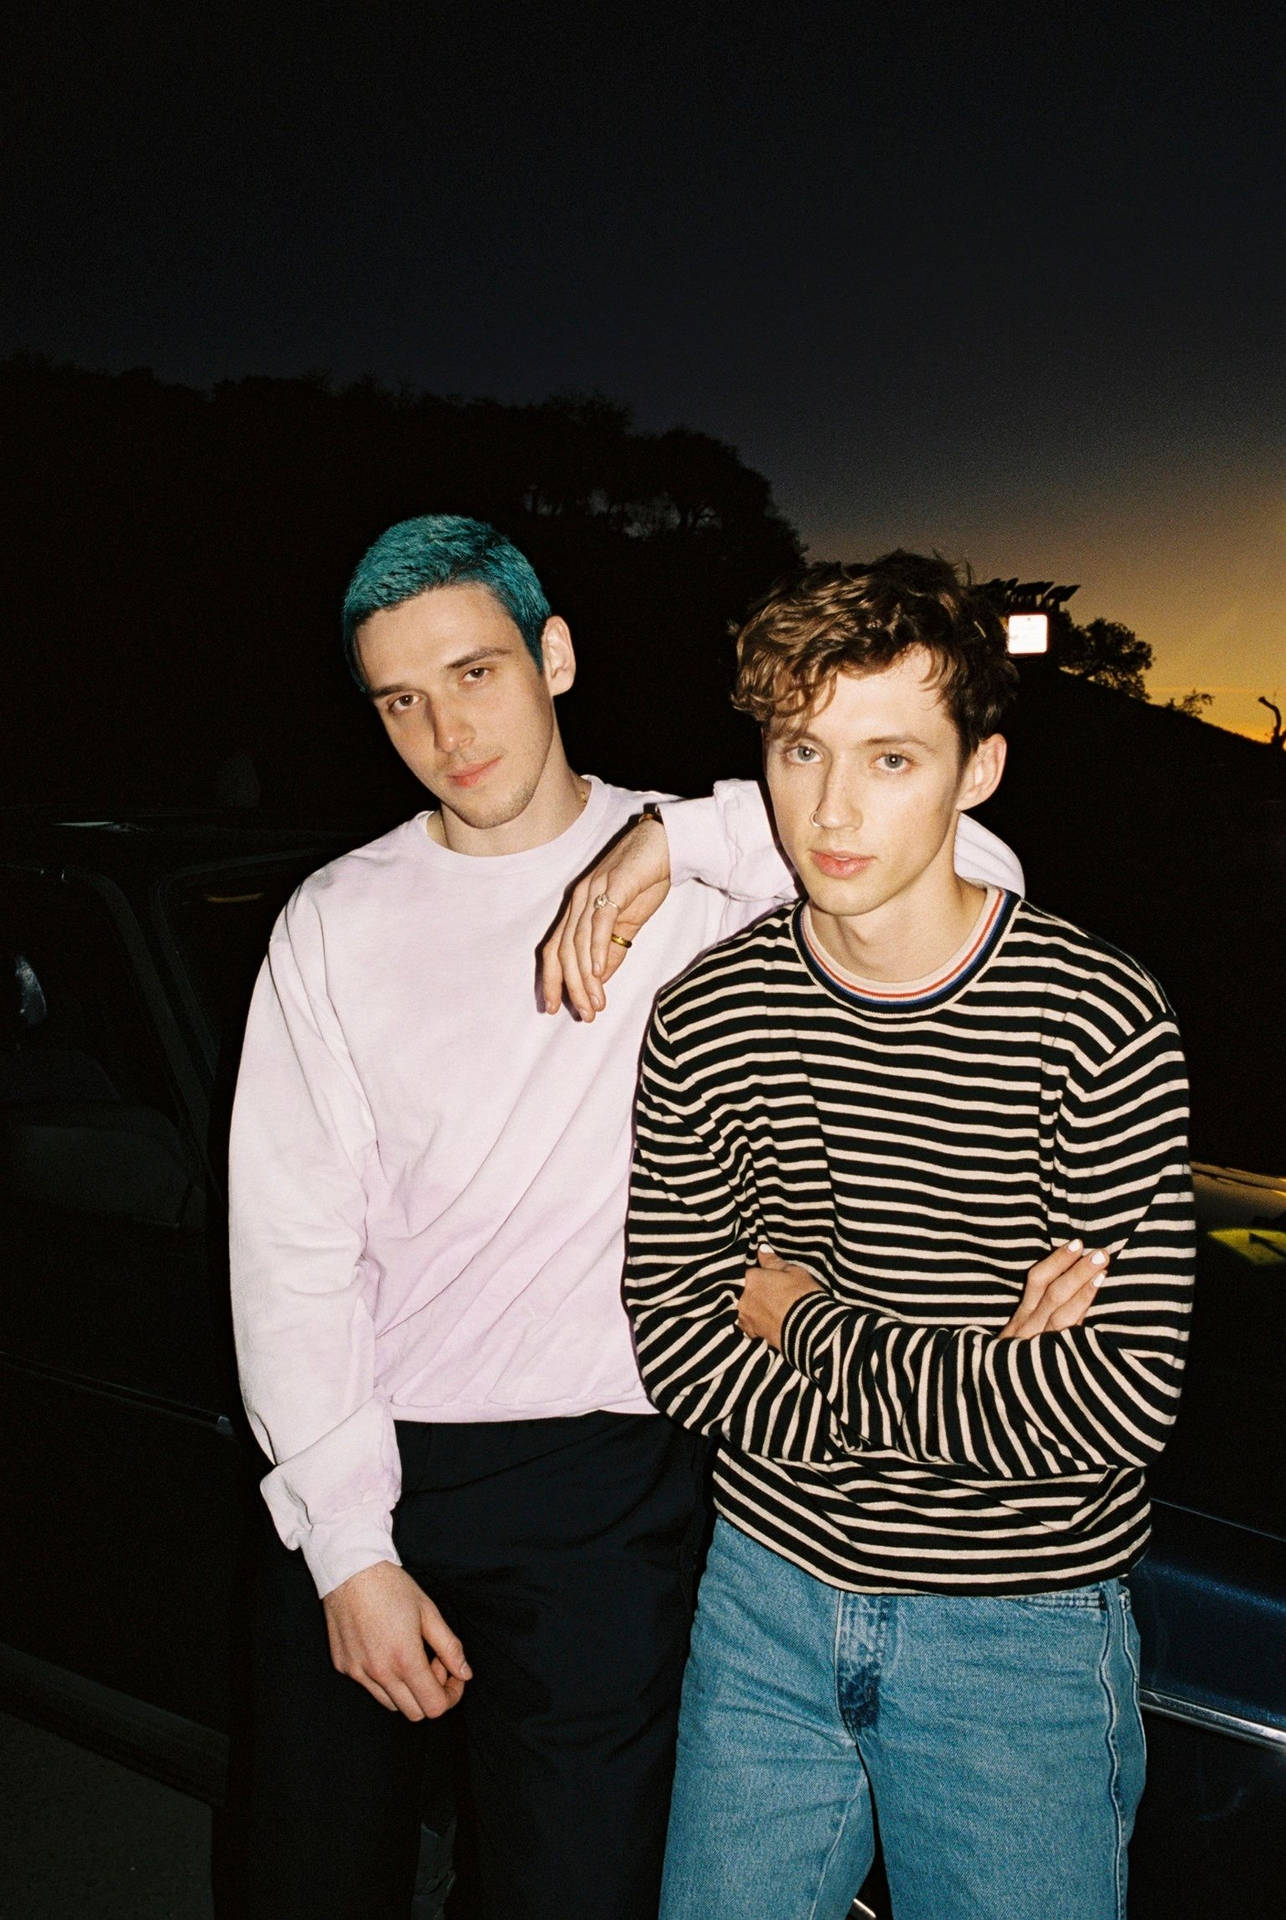 Troye Sivan and Lauv posing in a candid shot for their hit collaboration, "I'm So Tired". Wallpaper